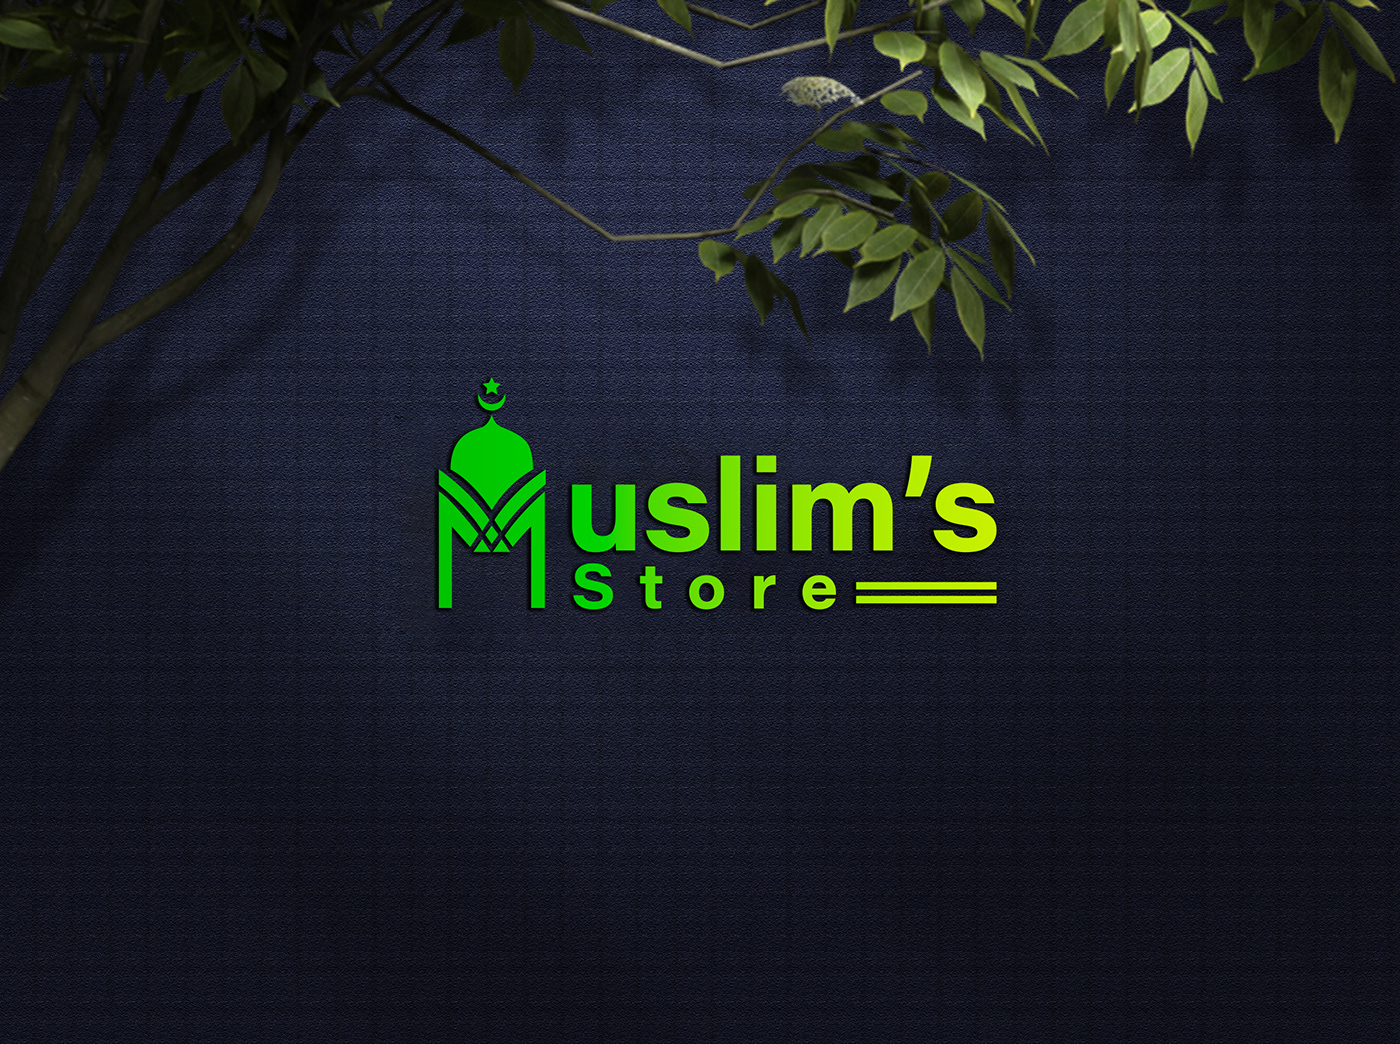 It's a Store logo design, I have done this for Muslim's store owner 

